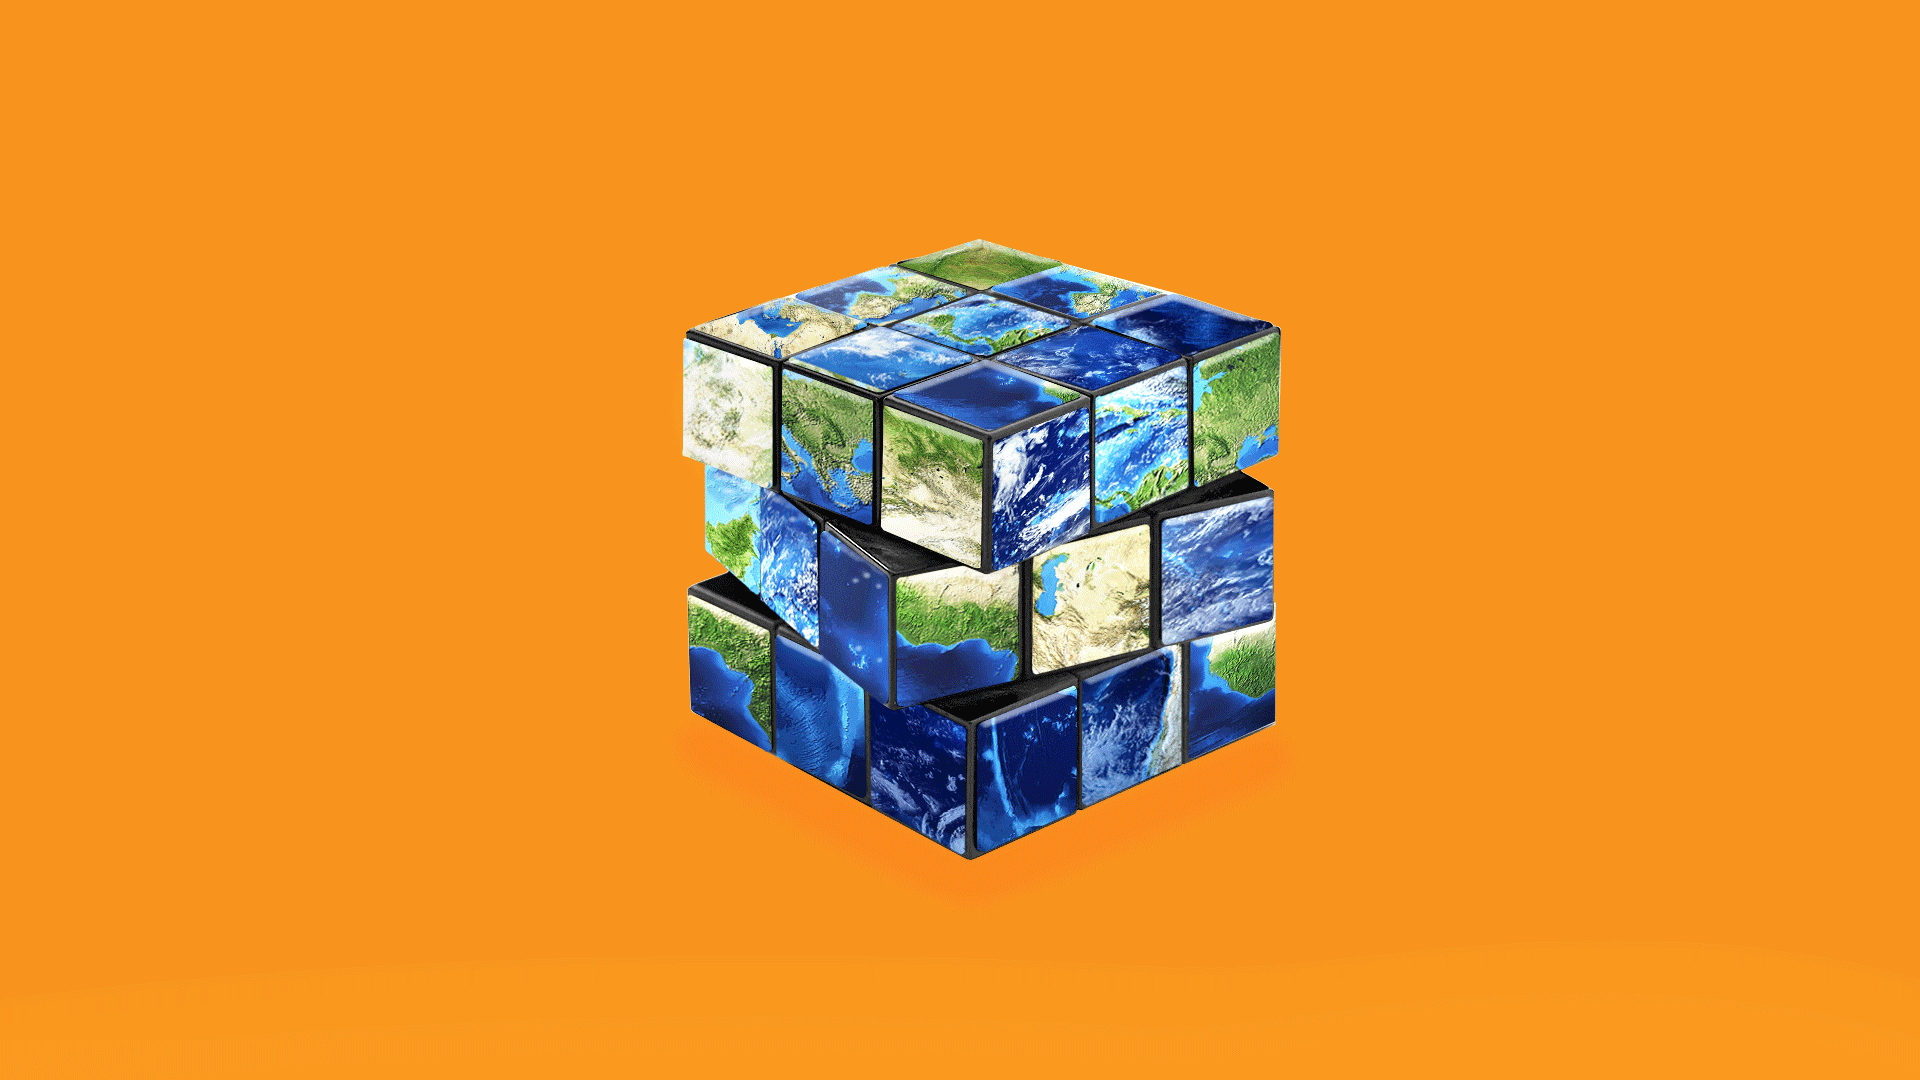 Illustration of the Earth in the shape of a Rubik's Cube.